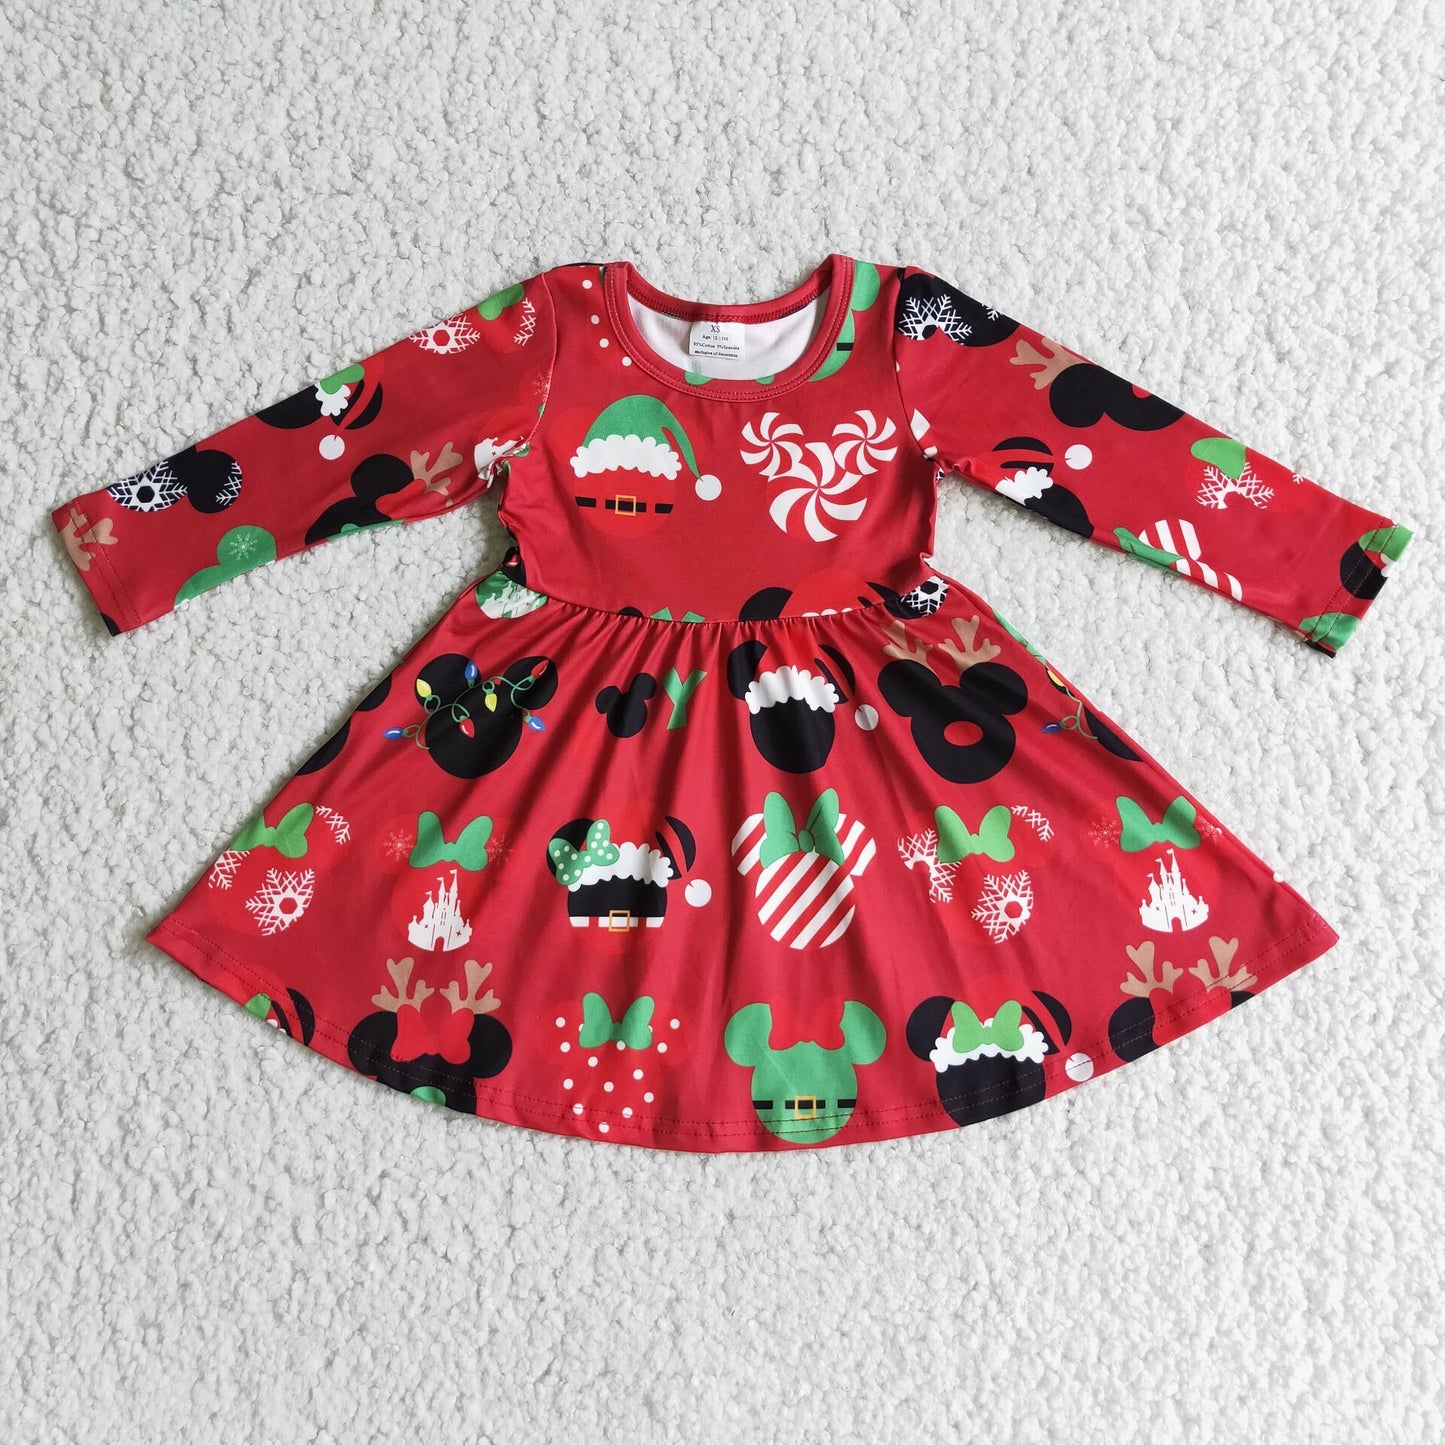 Red mouse long sleeve girls boutique Christmas twirl dresses